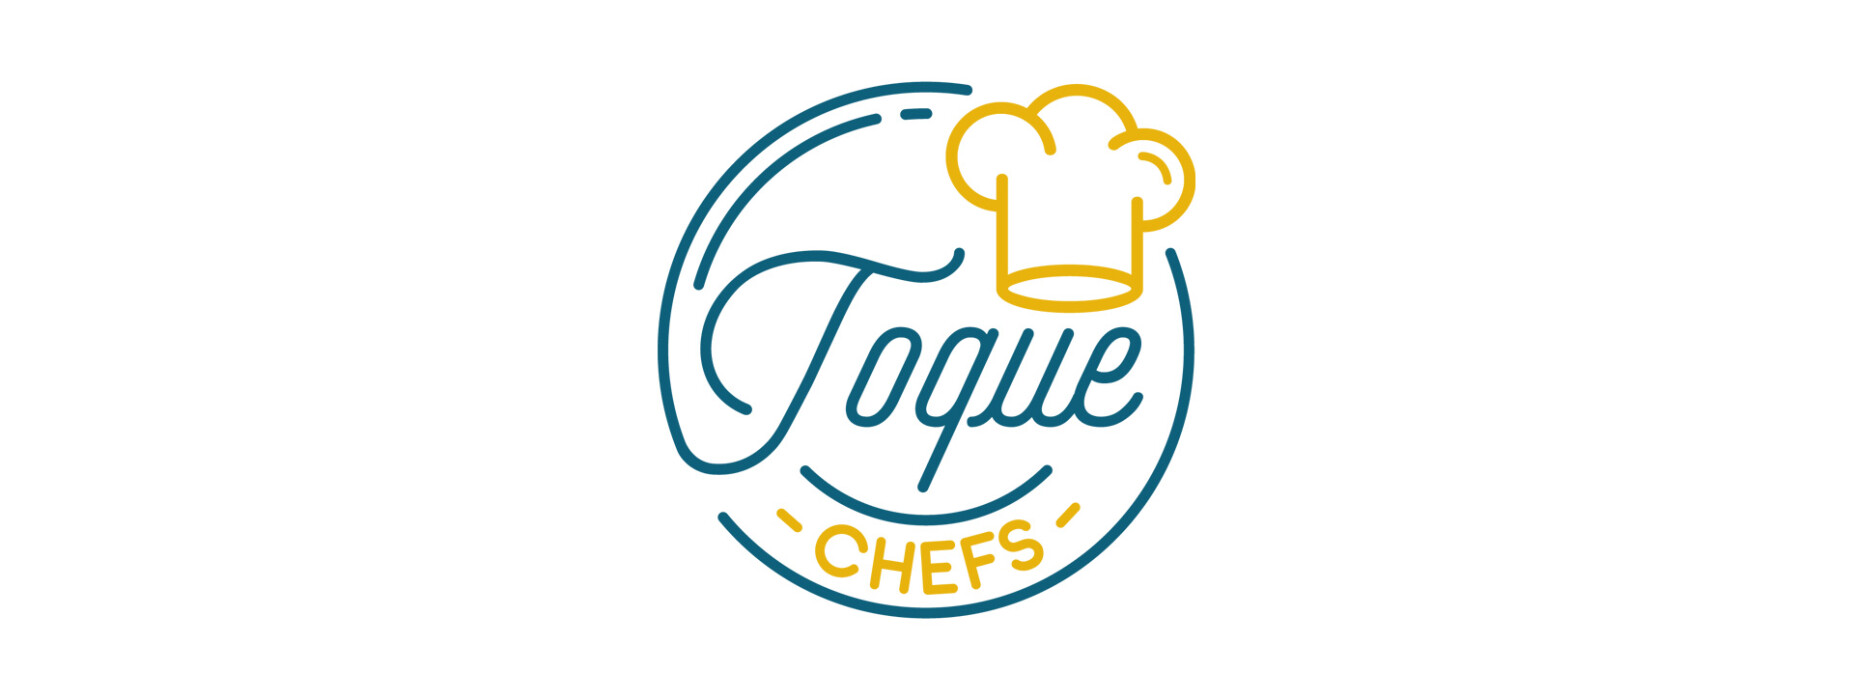 toque-chefs.png